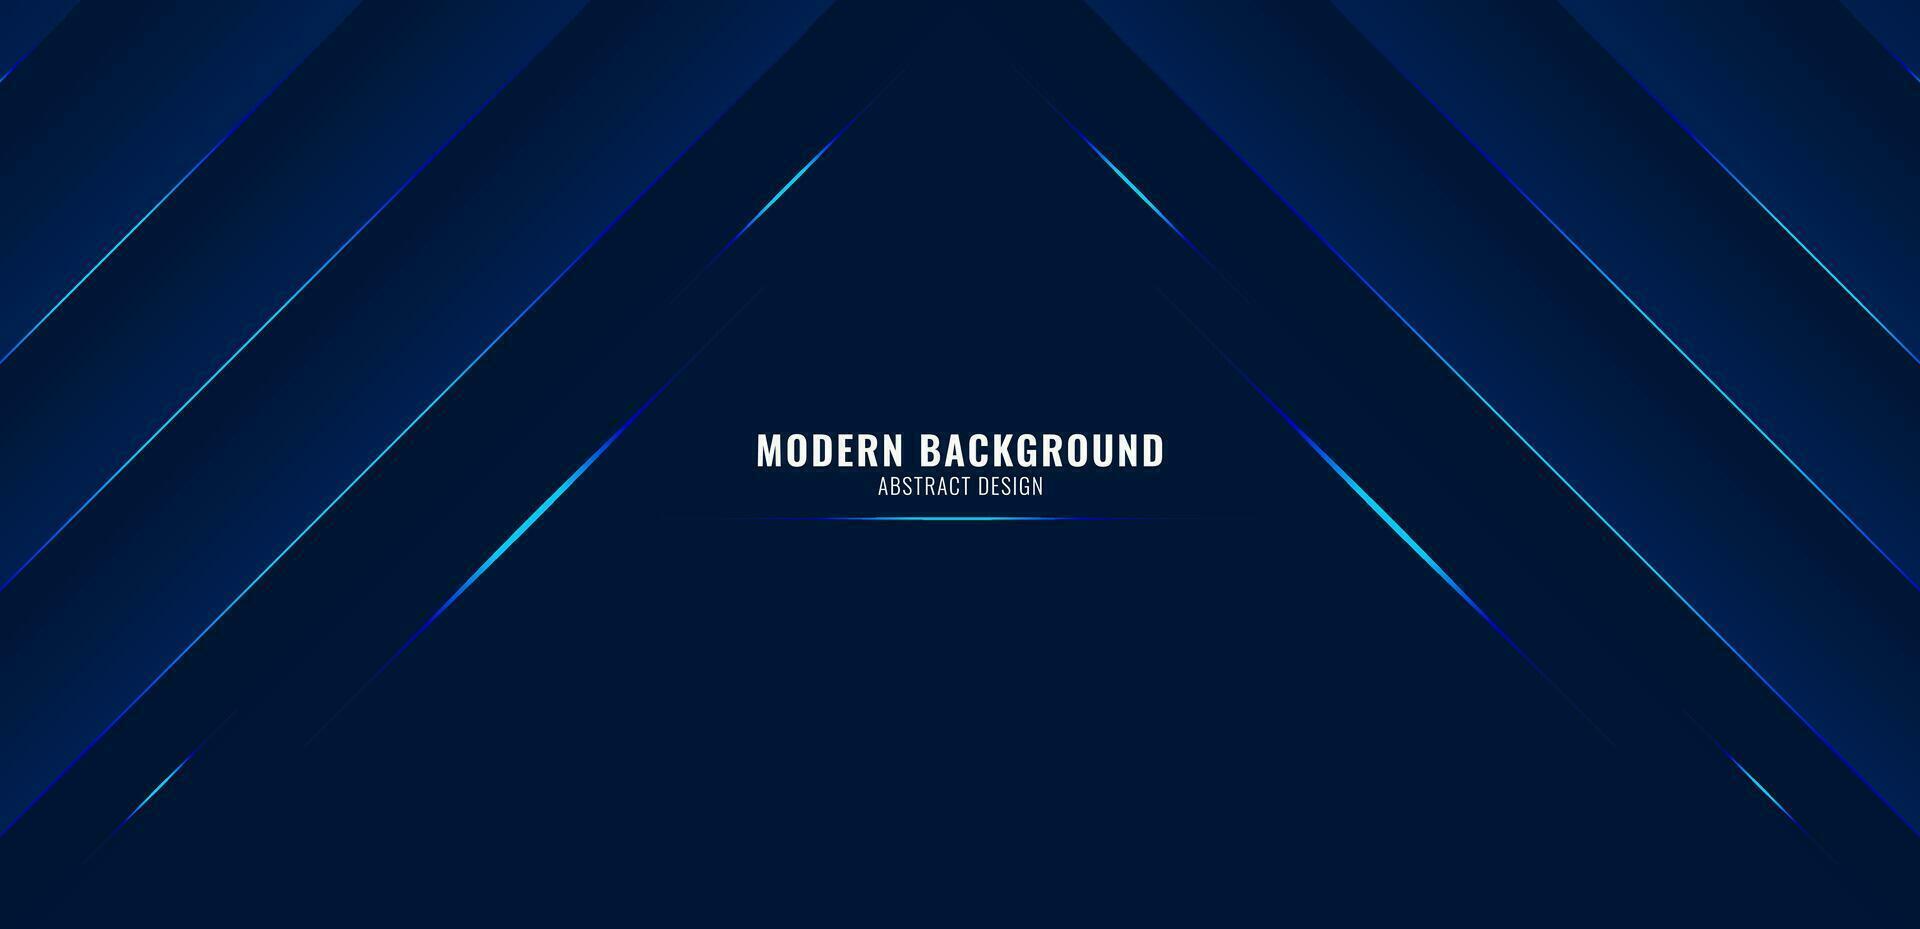 Dark blue background with abstract glowing lines graphic elements. Modern simple texture design. Futuristic technology concept. Perfect for banner, poster, cover, landing page, etc. vector